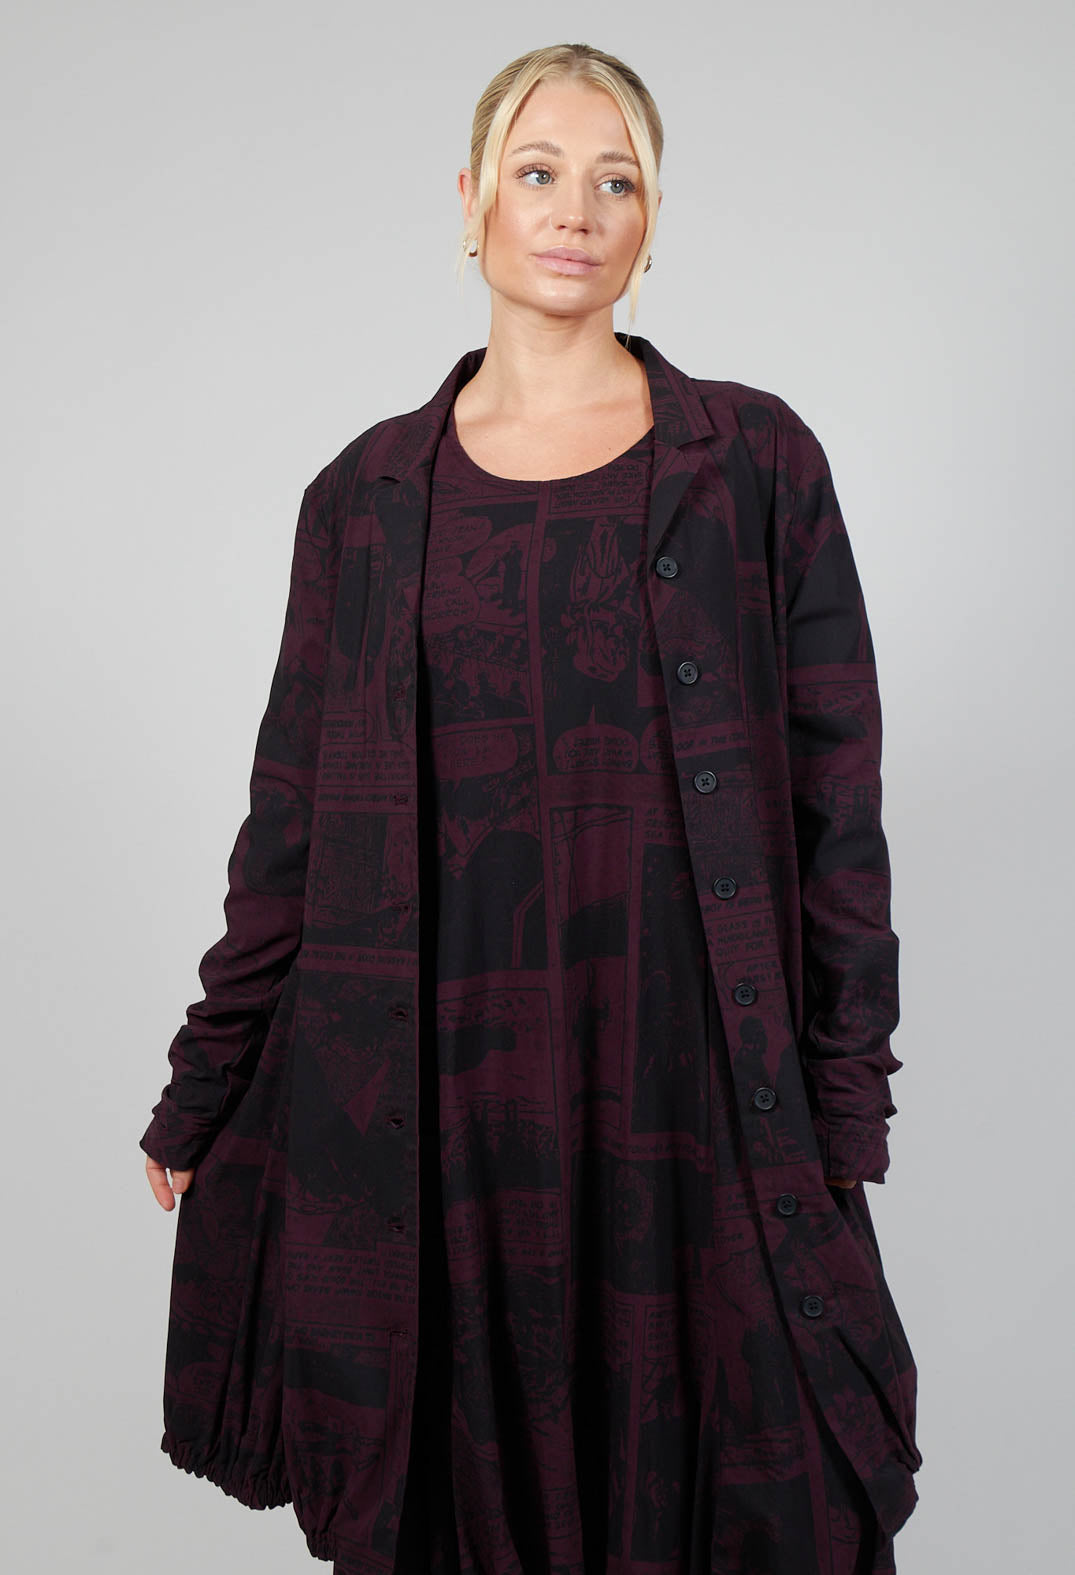 Coat with Gathered Hem in Ruby Comic